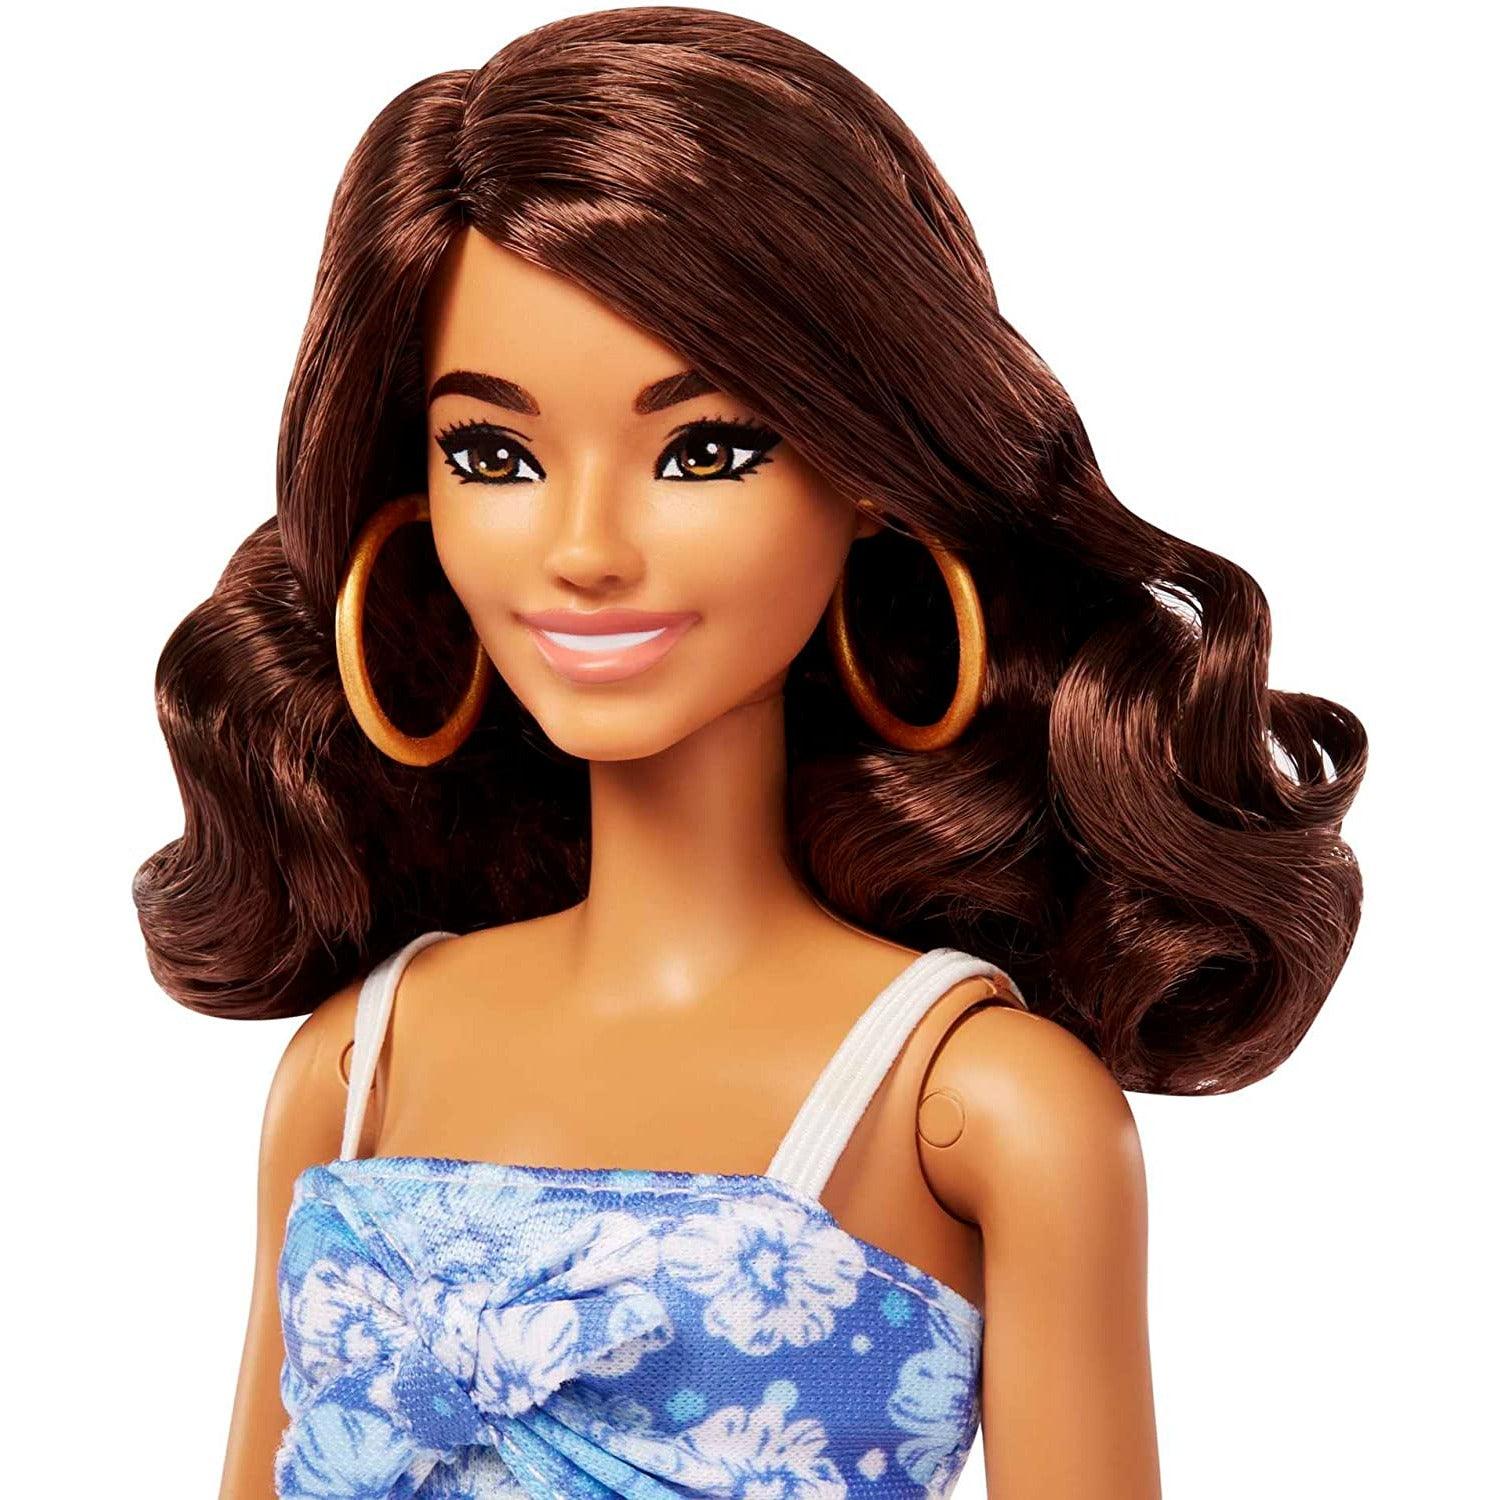 Barbie Loves the Ocean Doll, Brunette with Blue Sundress and Accessories, Doll and Clothes - BumbleToys - 5-7 Years, Barbie, Fashion Dolls & Accessories, Girls, Pre-Order